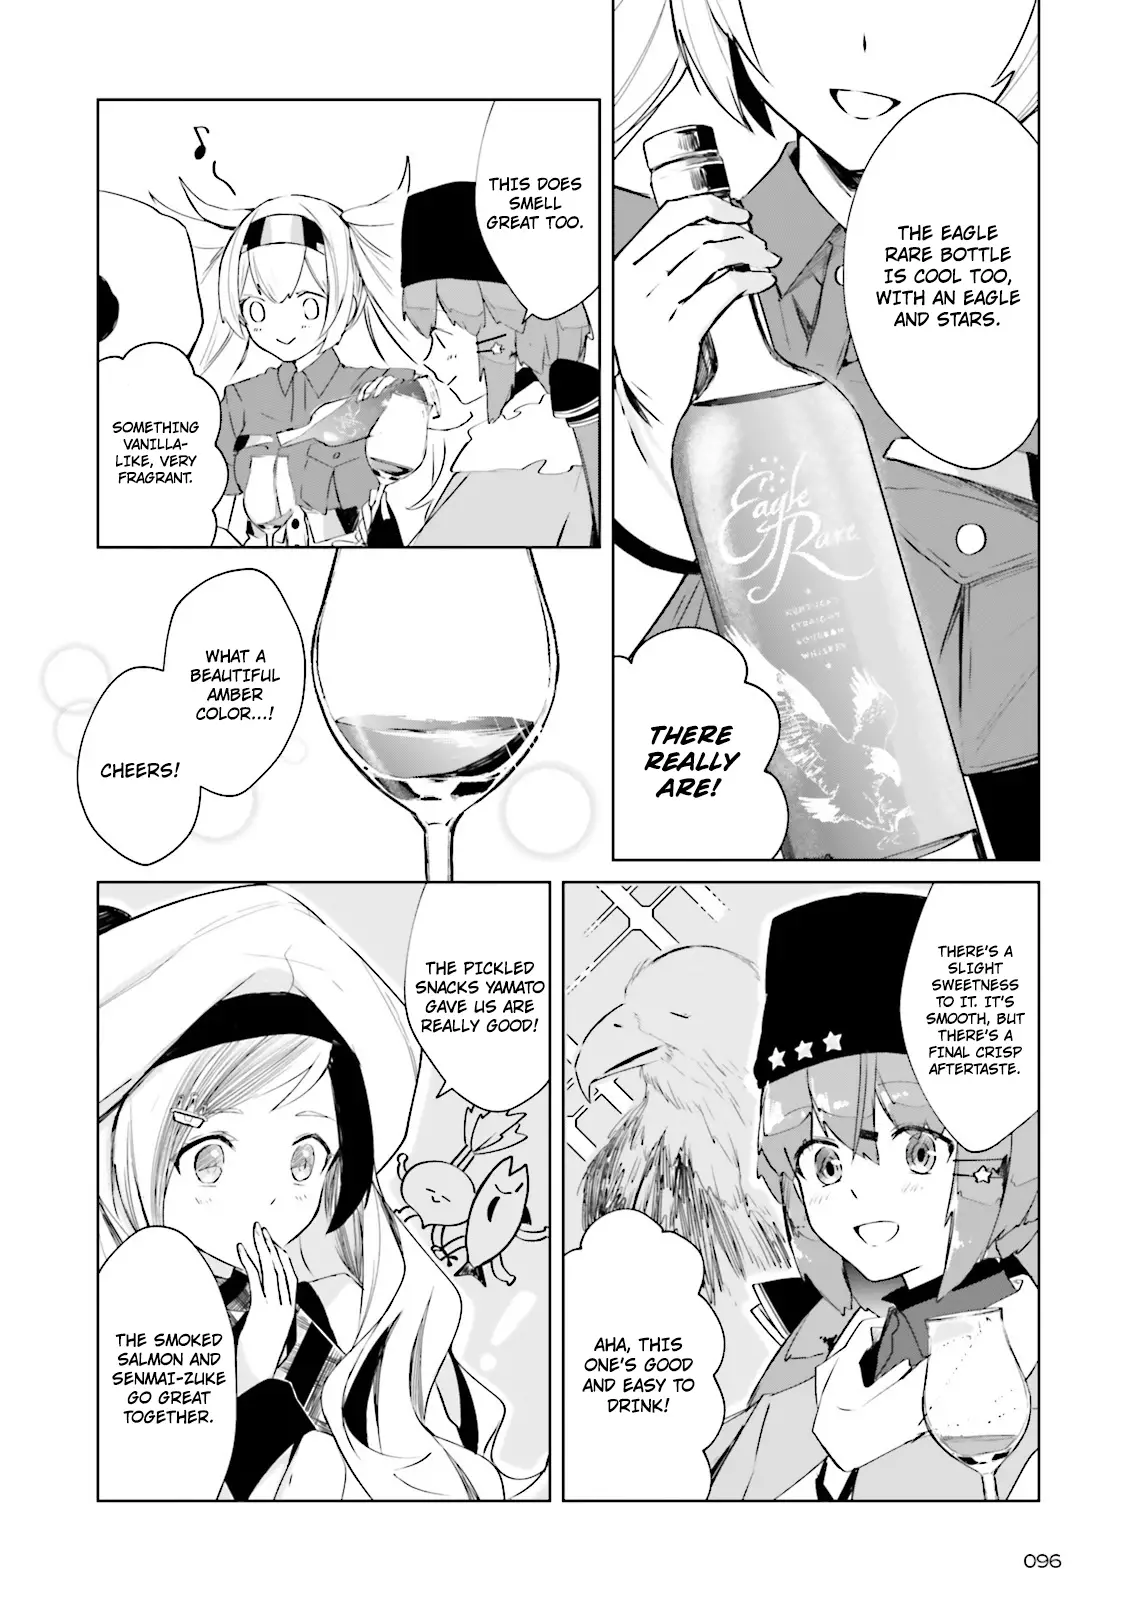 Kantai Collection -Kancolle- Tonight, Another "salute"! - 3 page 19